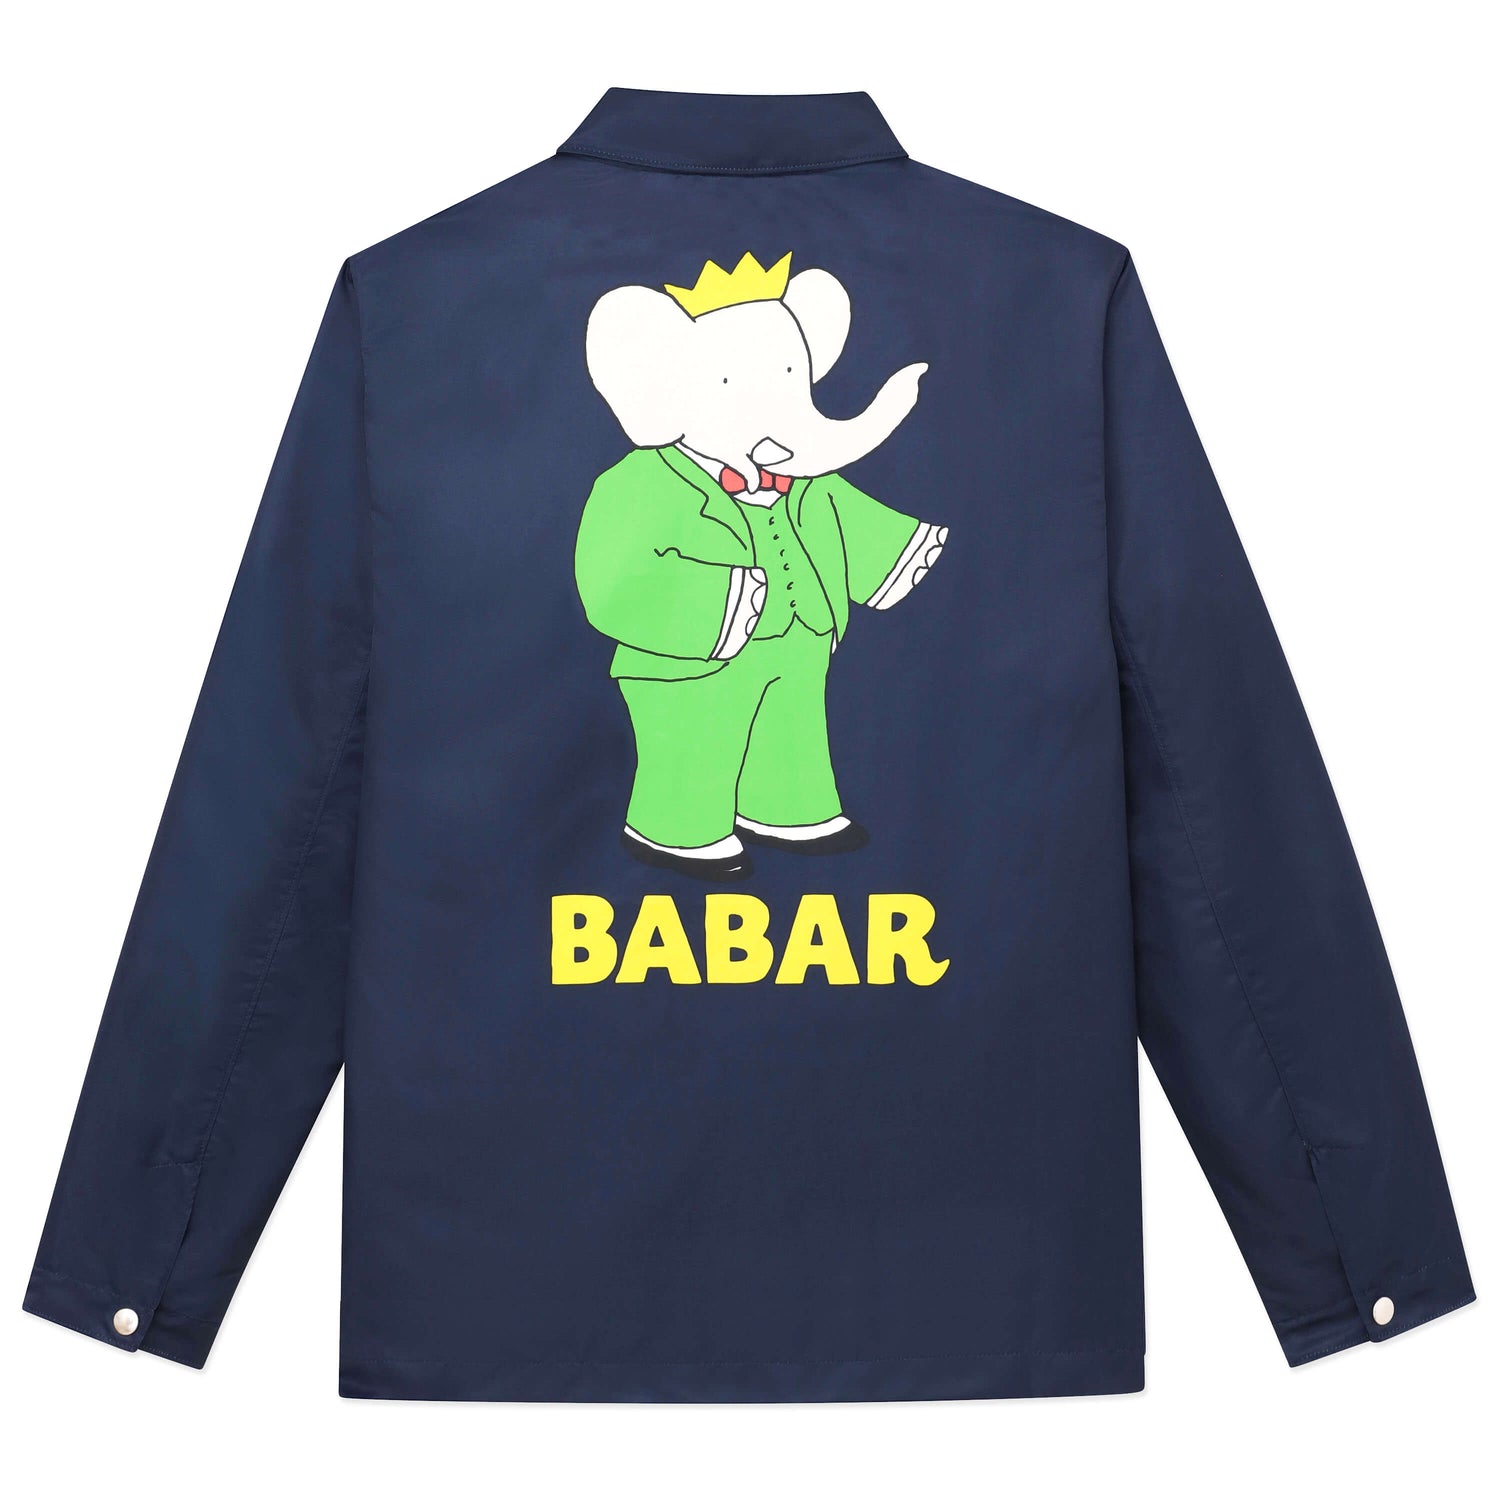 Back of navy coach's jacket with printed Babar motif.